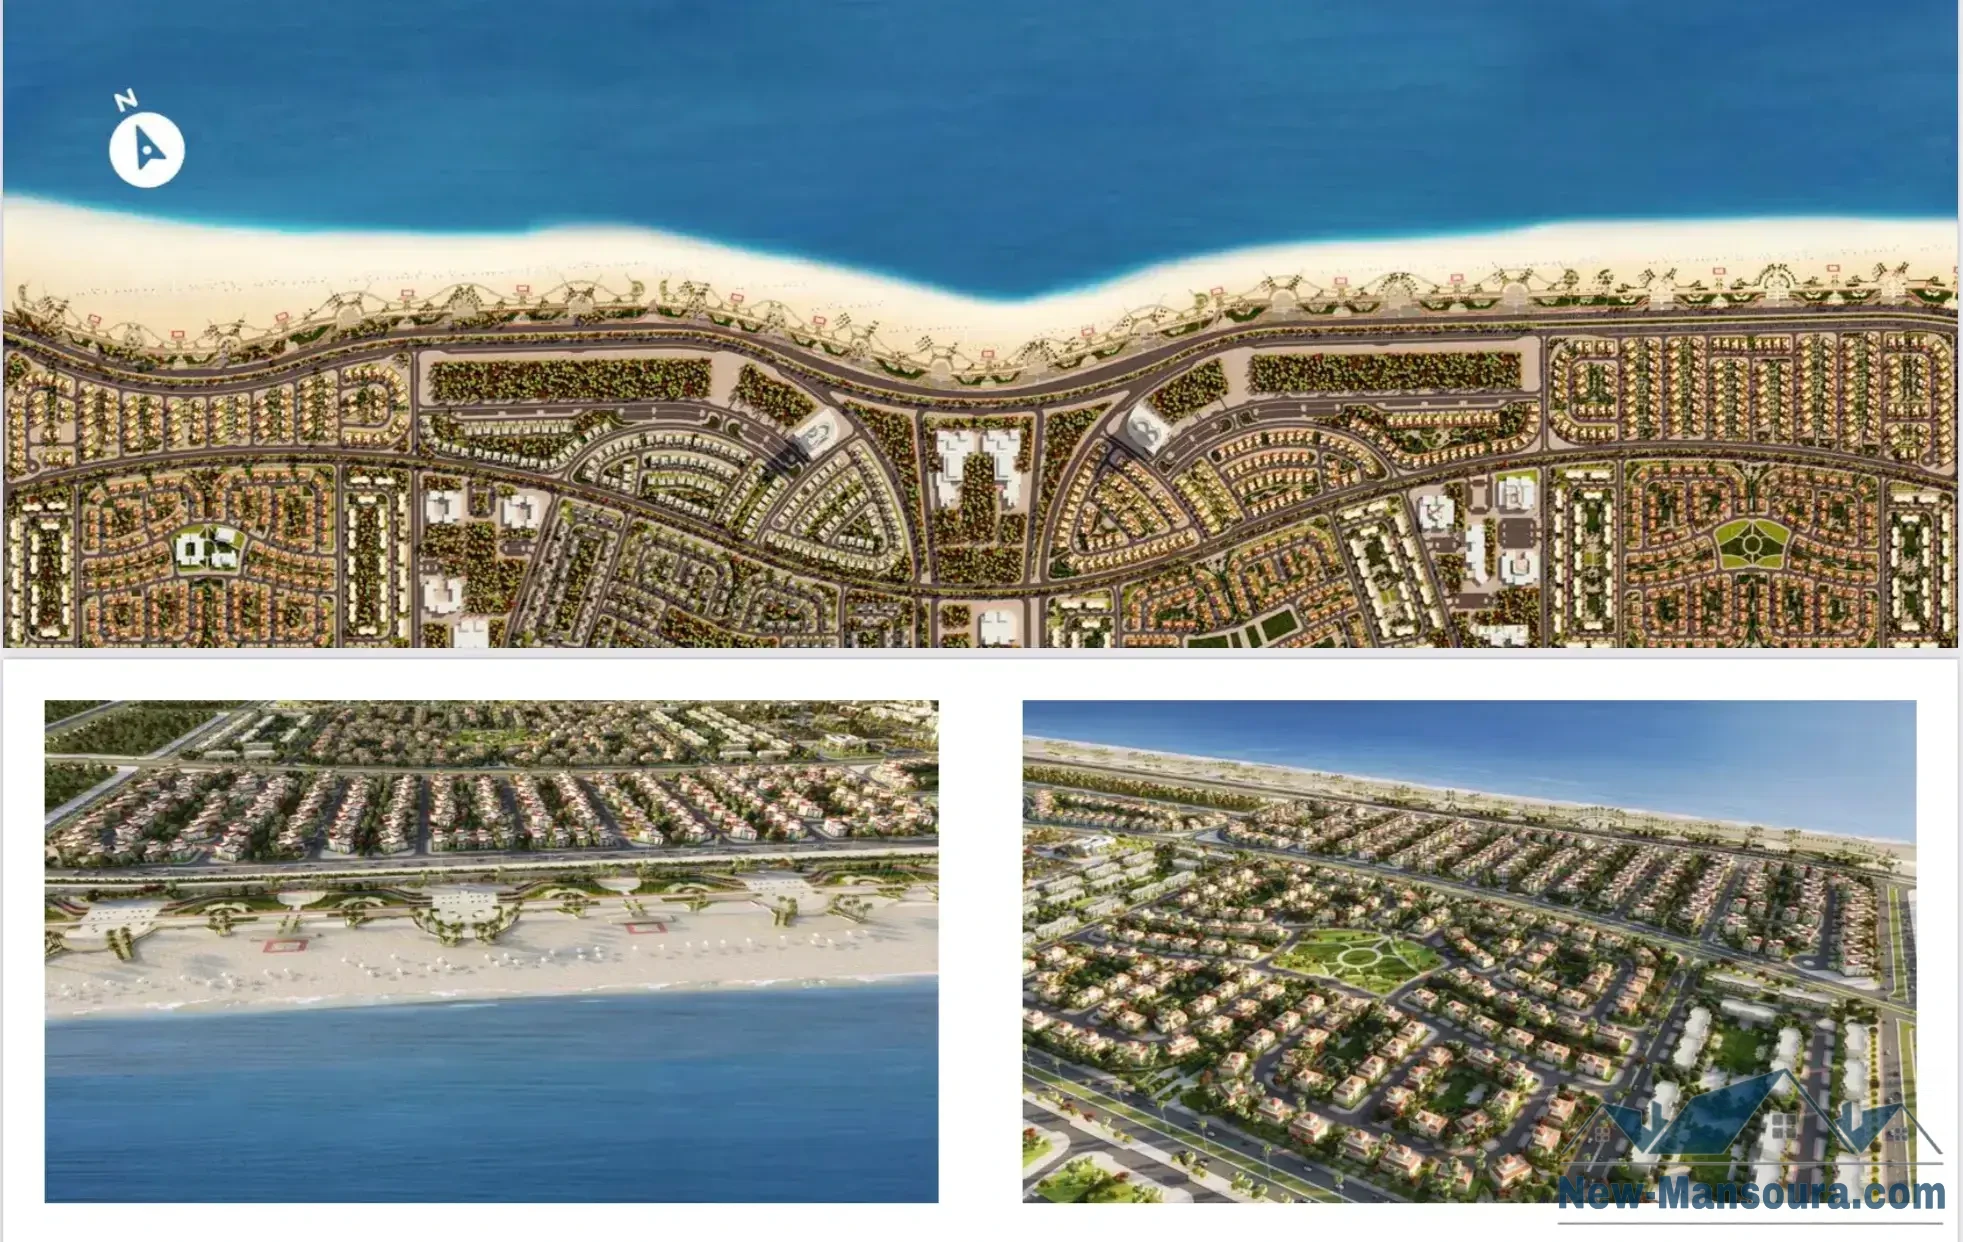 Zahya compound New Mansoura by CityEdge company directly on the sea